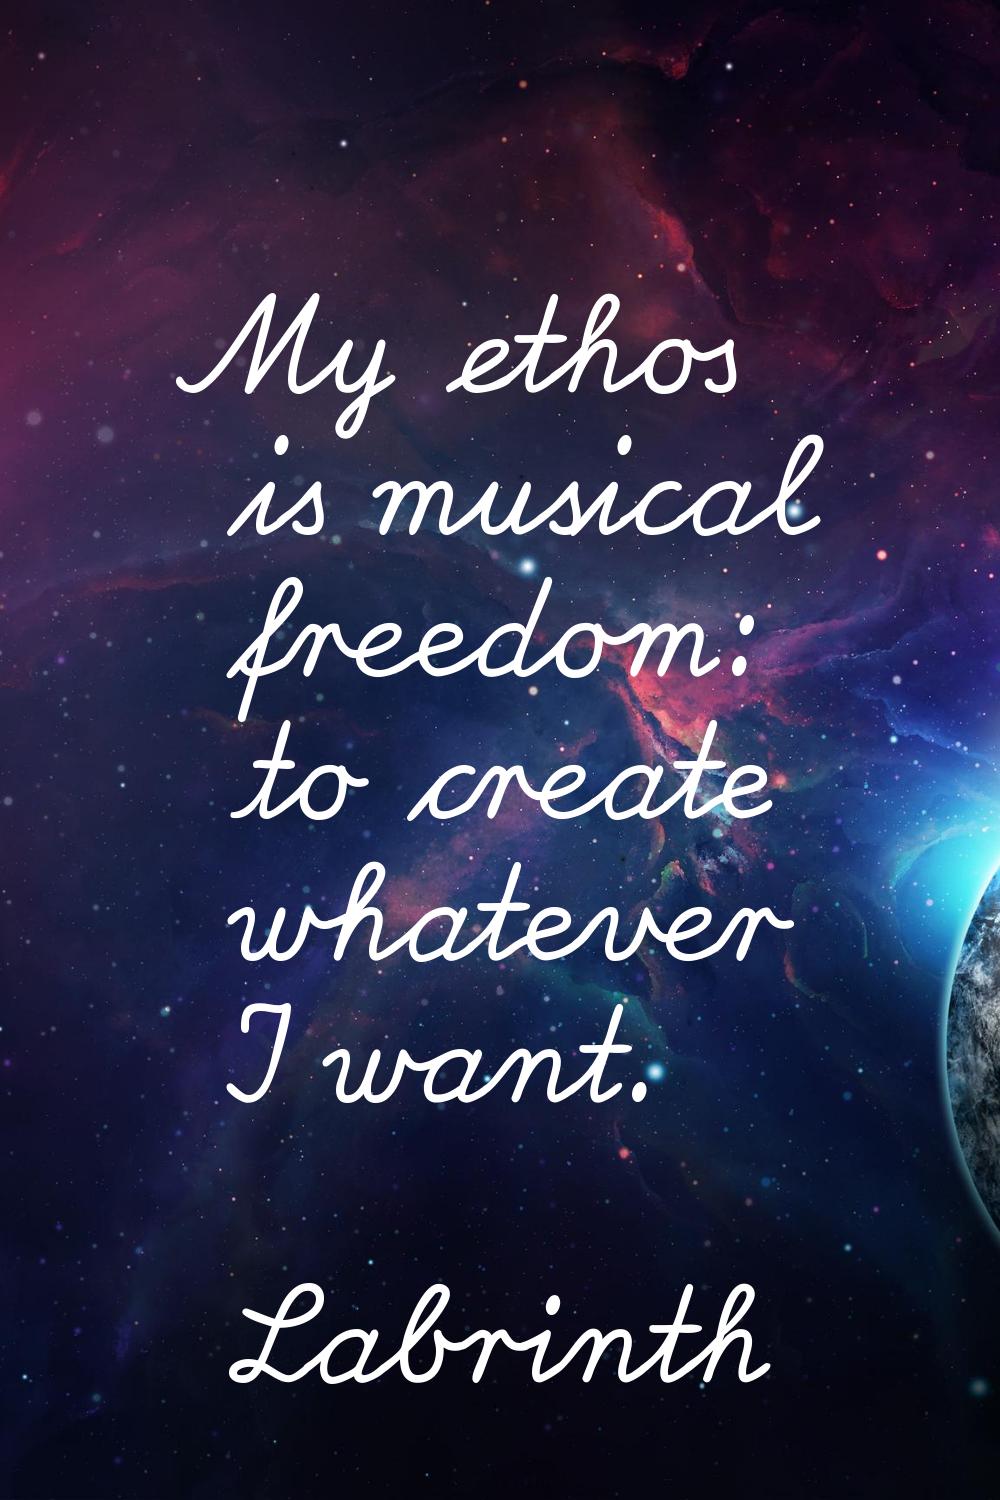 My ethos is musical freedom: to create whatever I want.